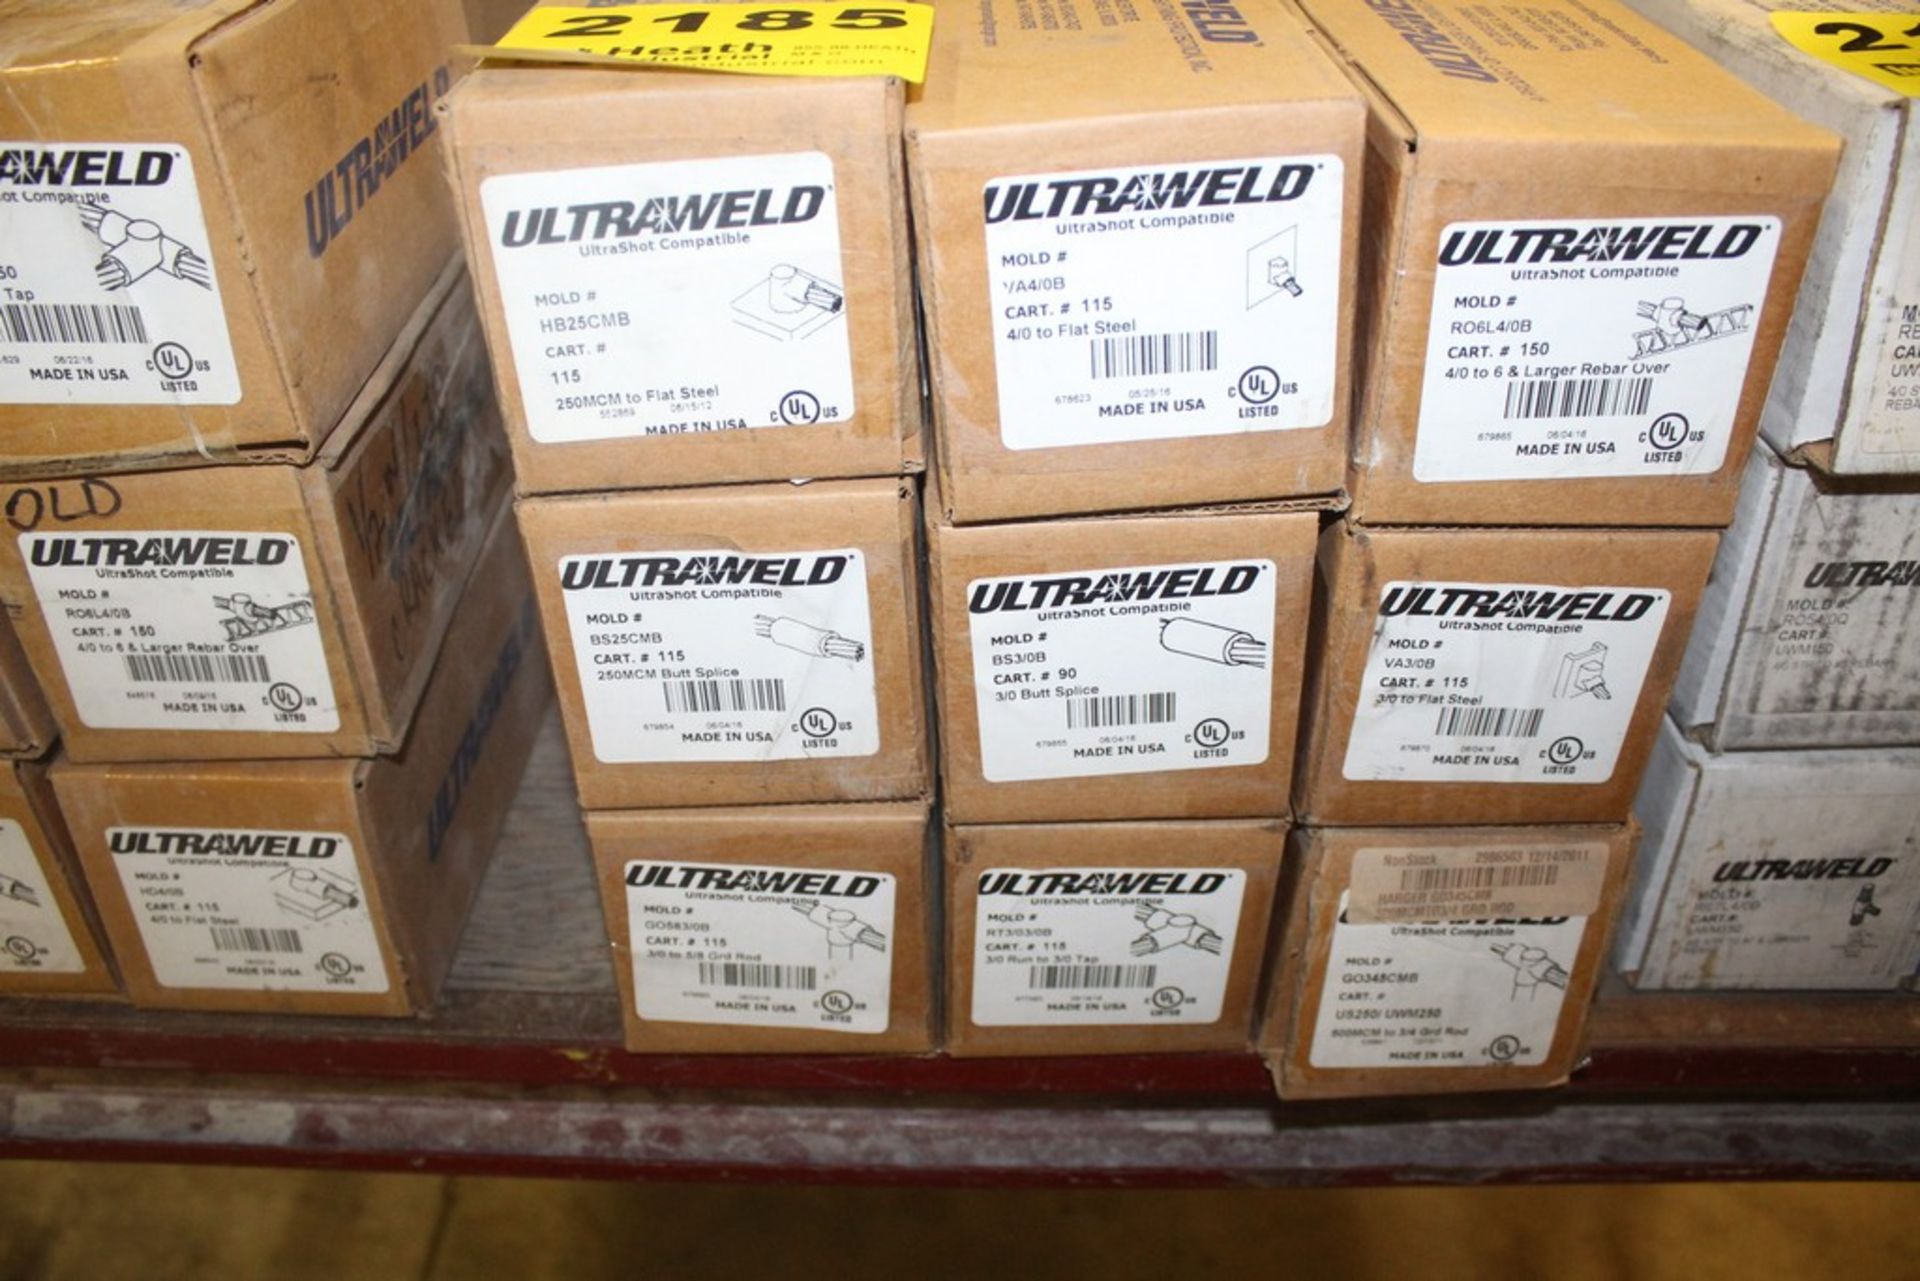 (9) BOXES OF HARGER ULTRAWELD, (1) 4/0 TO 6 & LARGER REBAR, (1) 3/0 TO 5/8 GRD ROD, (1) 4/0 BUTT